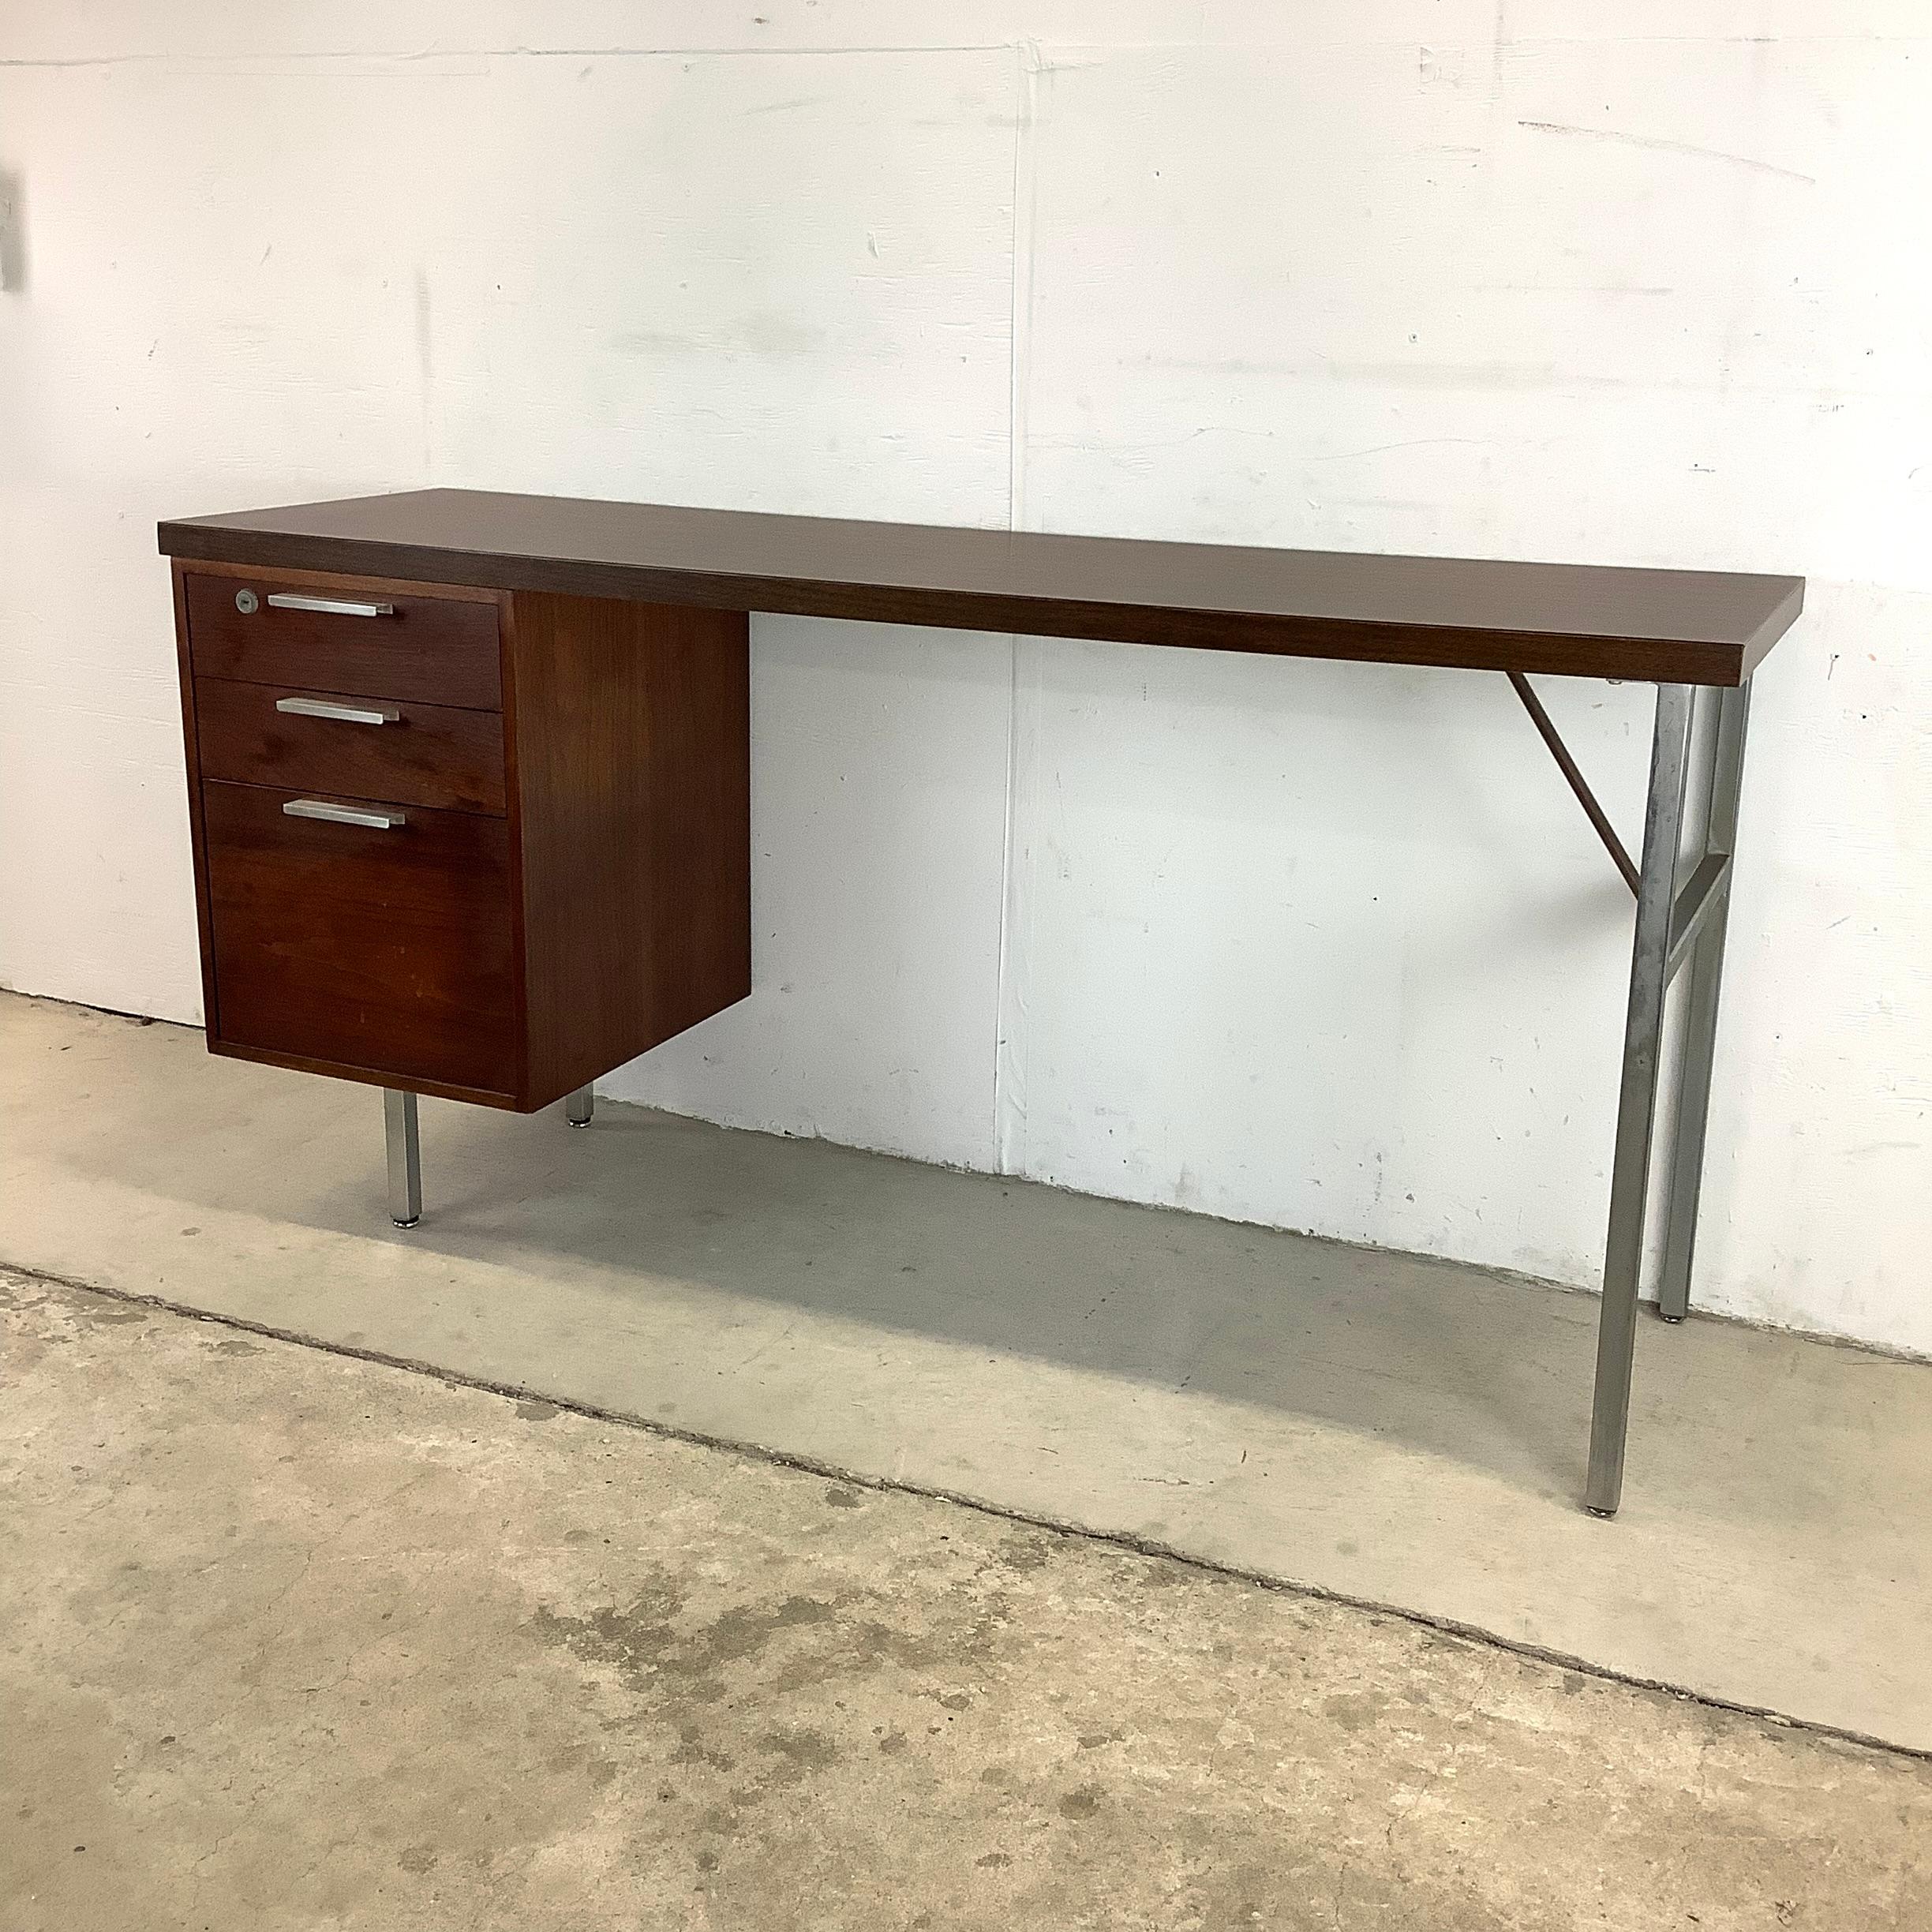 This unique midcentury writing desk is long and narrow with a durable laminate top and sturdy metal frames. Three drawer configuration includes plastic tray inserts and lower filing cabinet. The wide open space below the desktop allows for ease of